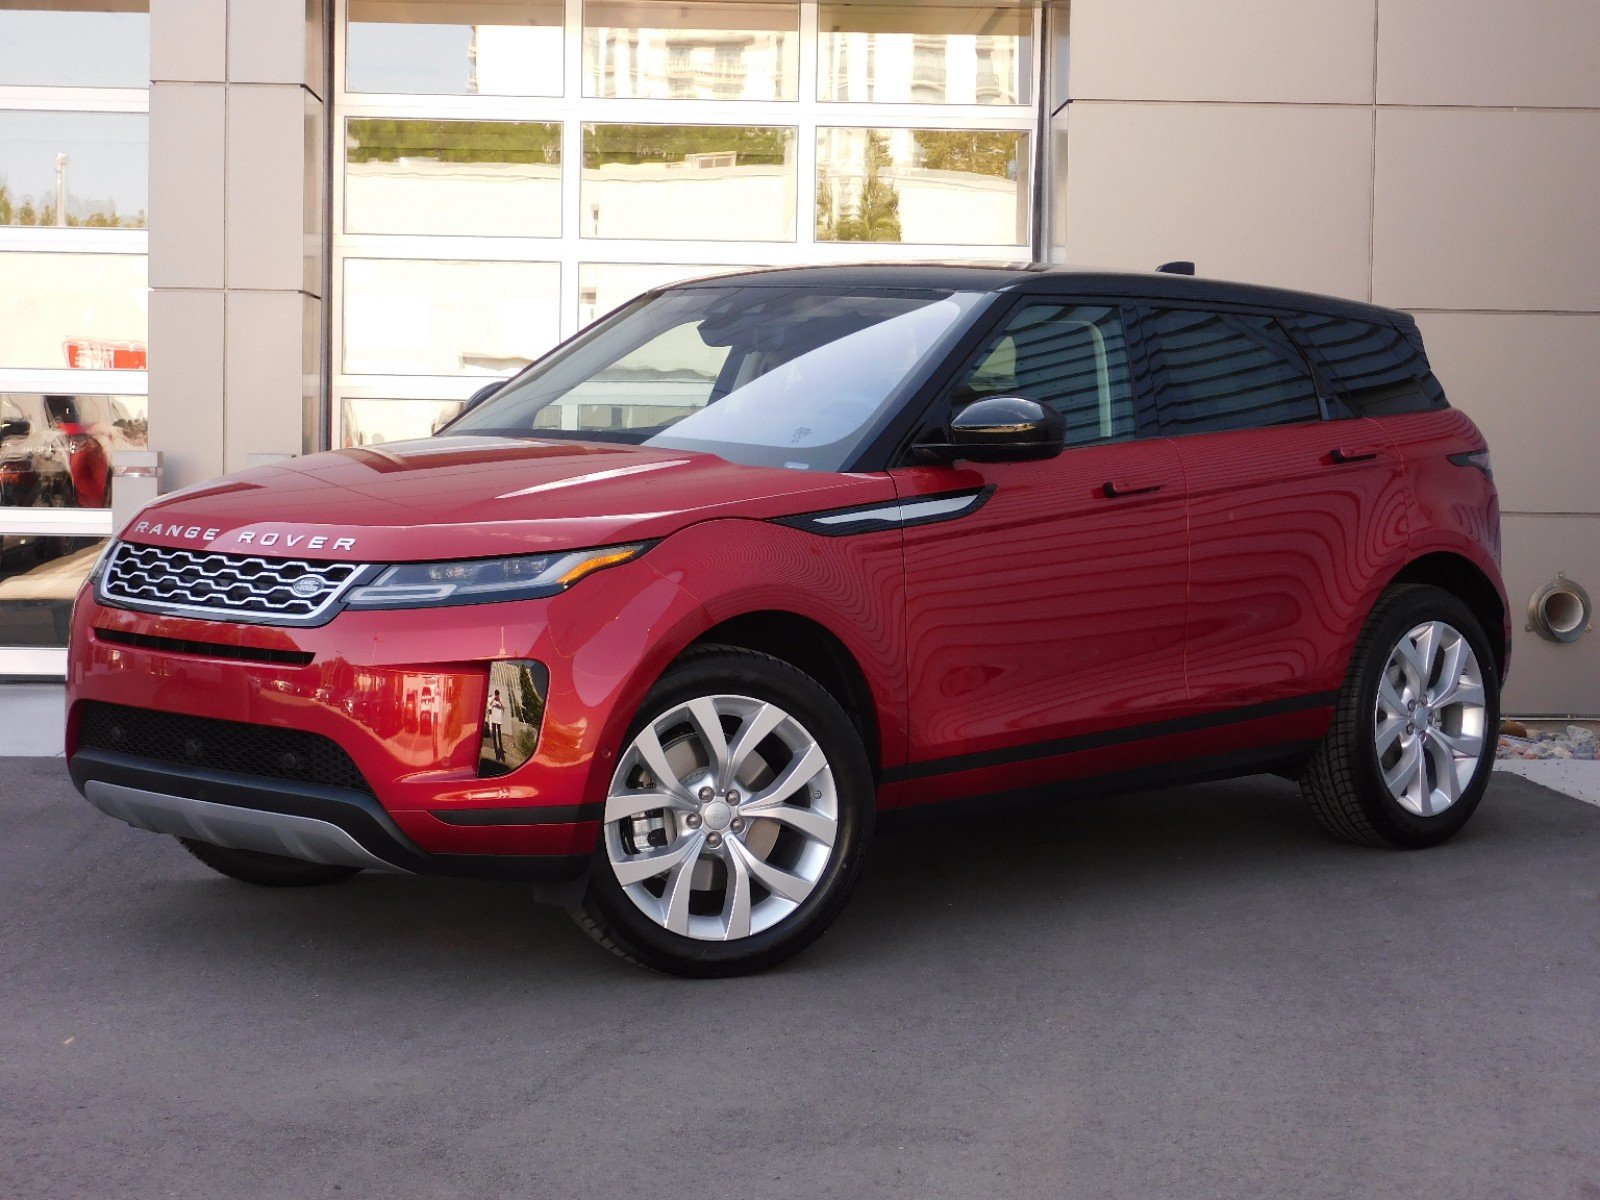 New Land Rover Range Rover Evoque Se With Navigation Awd